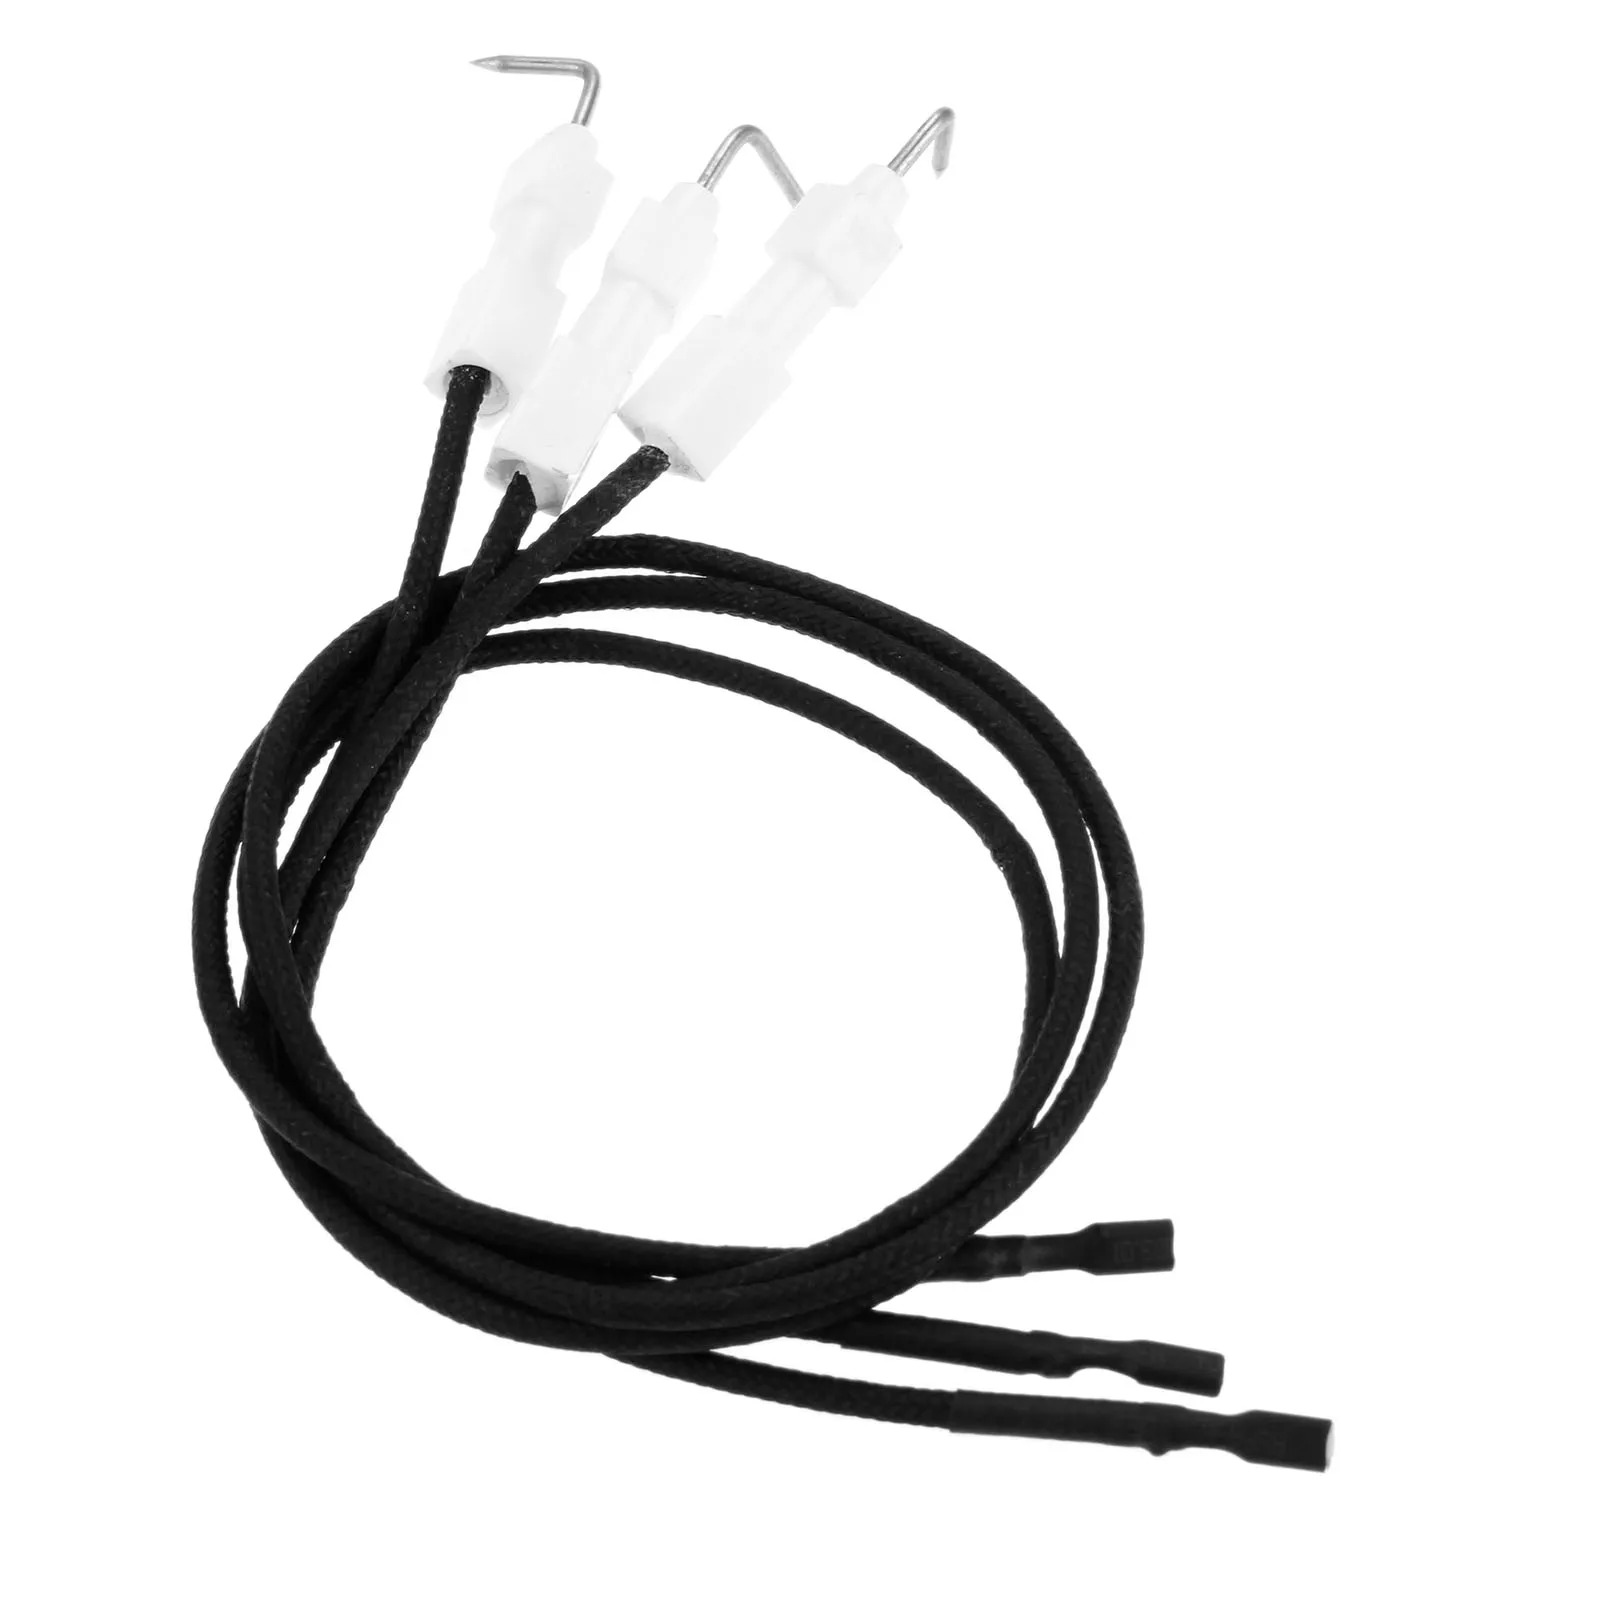 

3Pcs Propane Gas Patio Heater Universal Electrode Igniter Wire With Sparker 400mm For Grill Gas Stove Any Gas Appliance